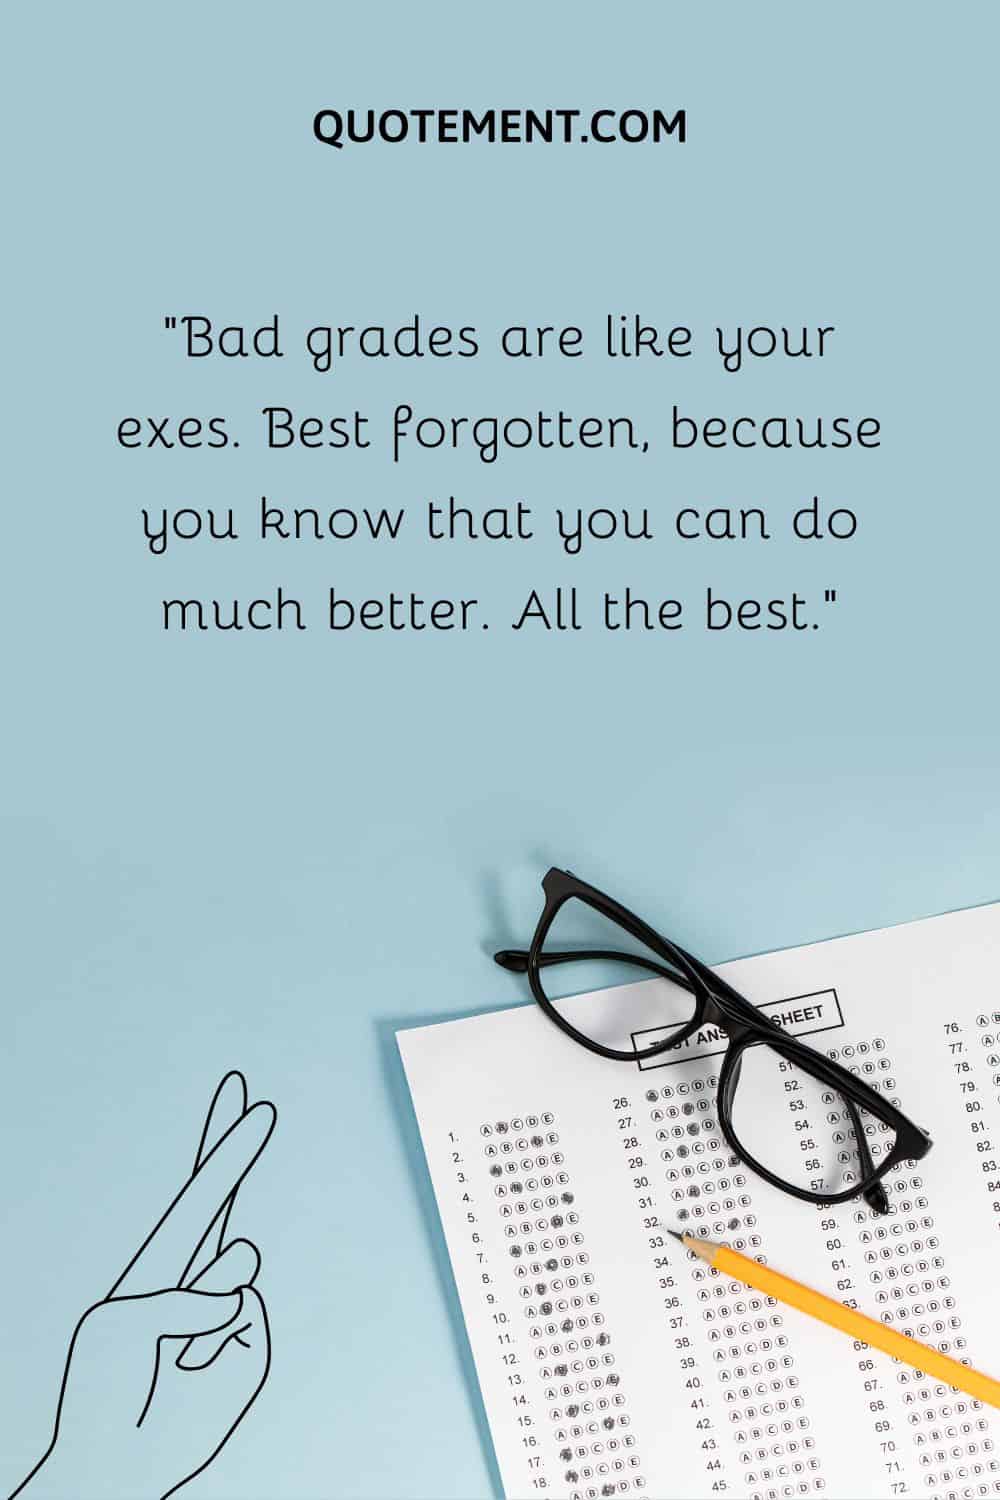 Bad grades are like your exes